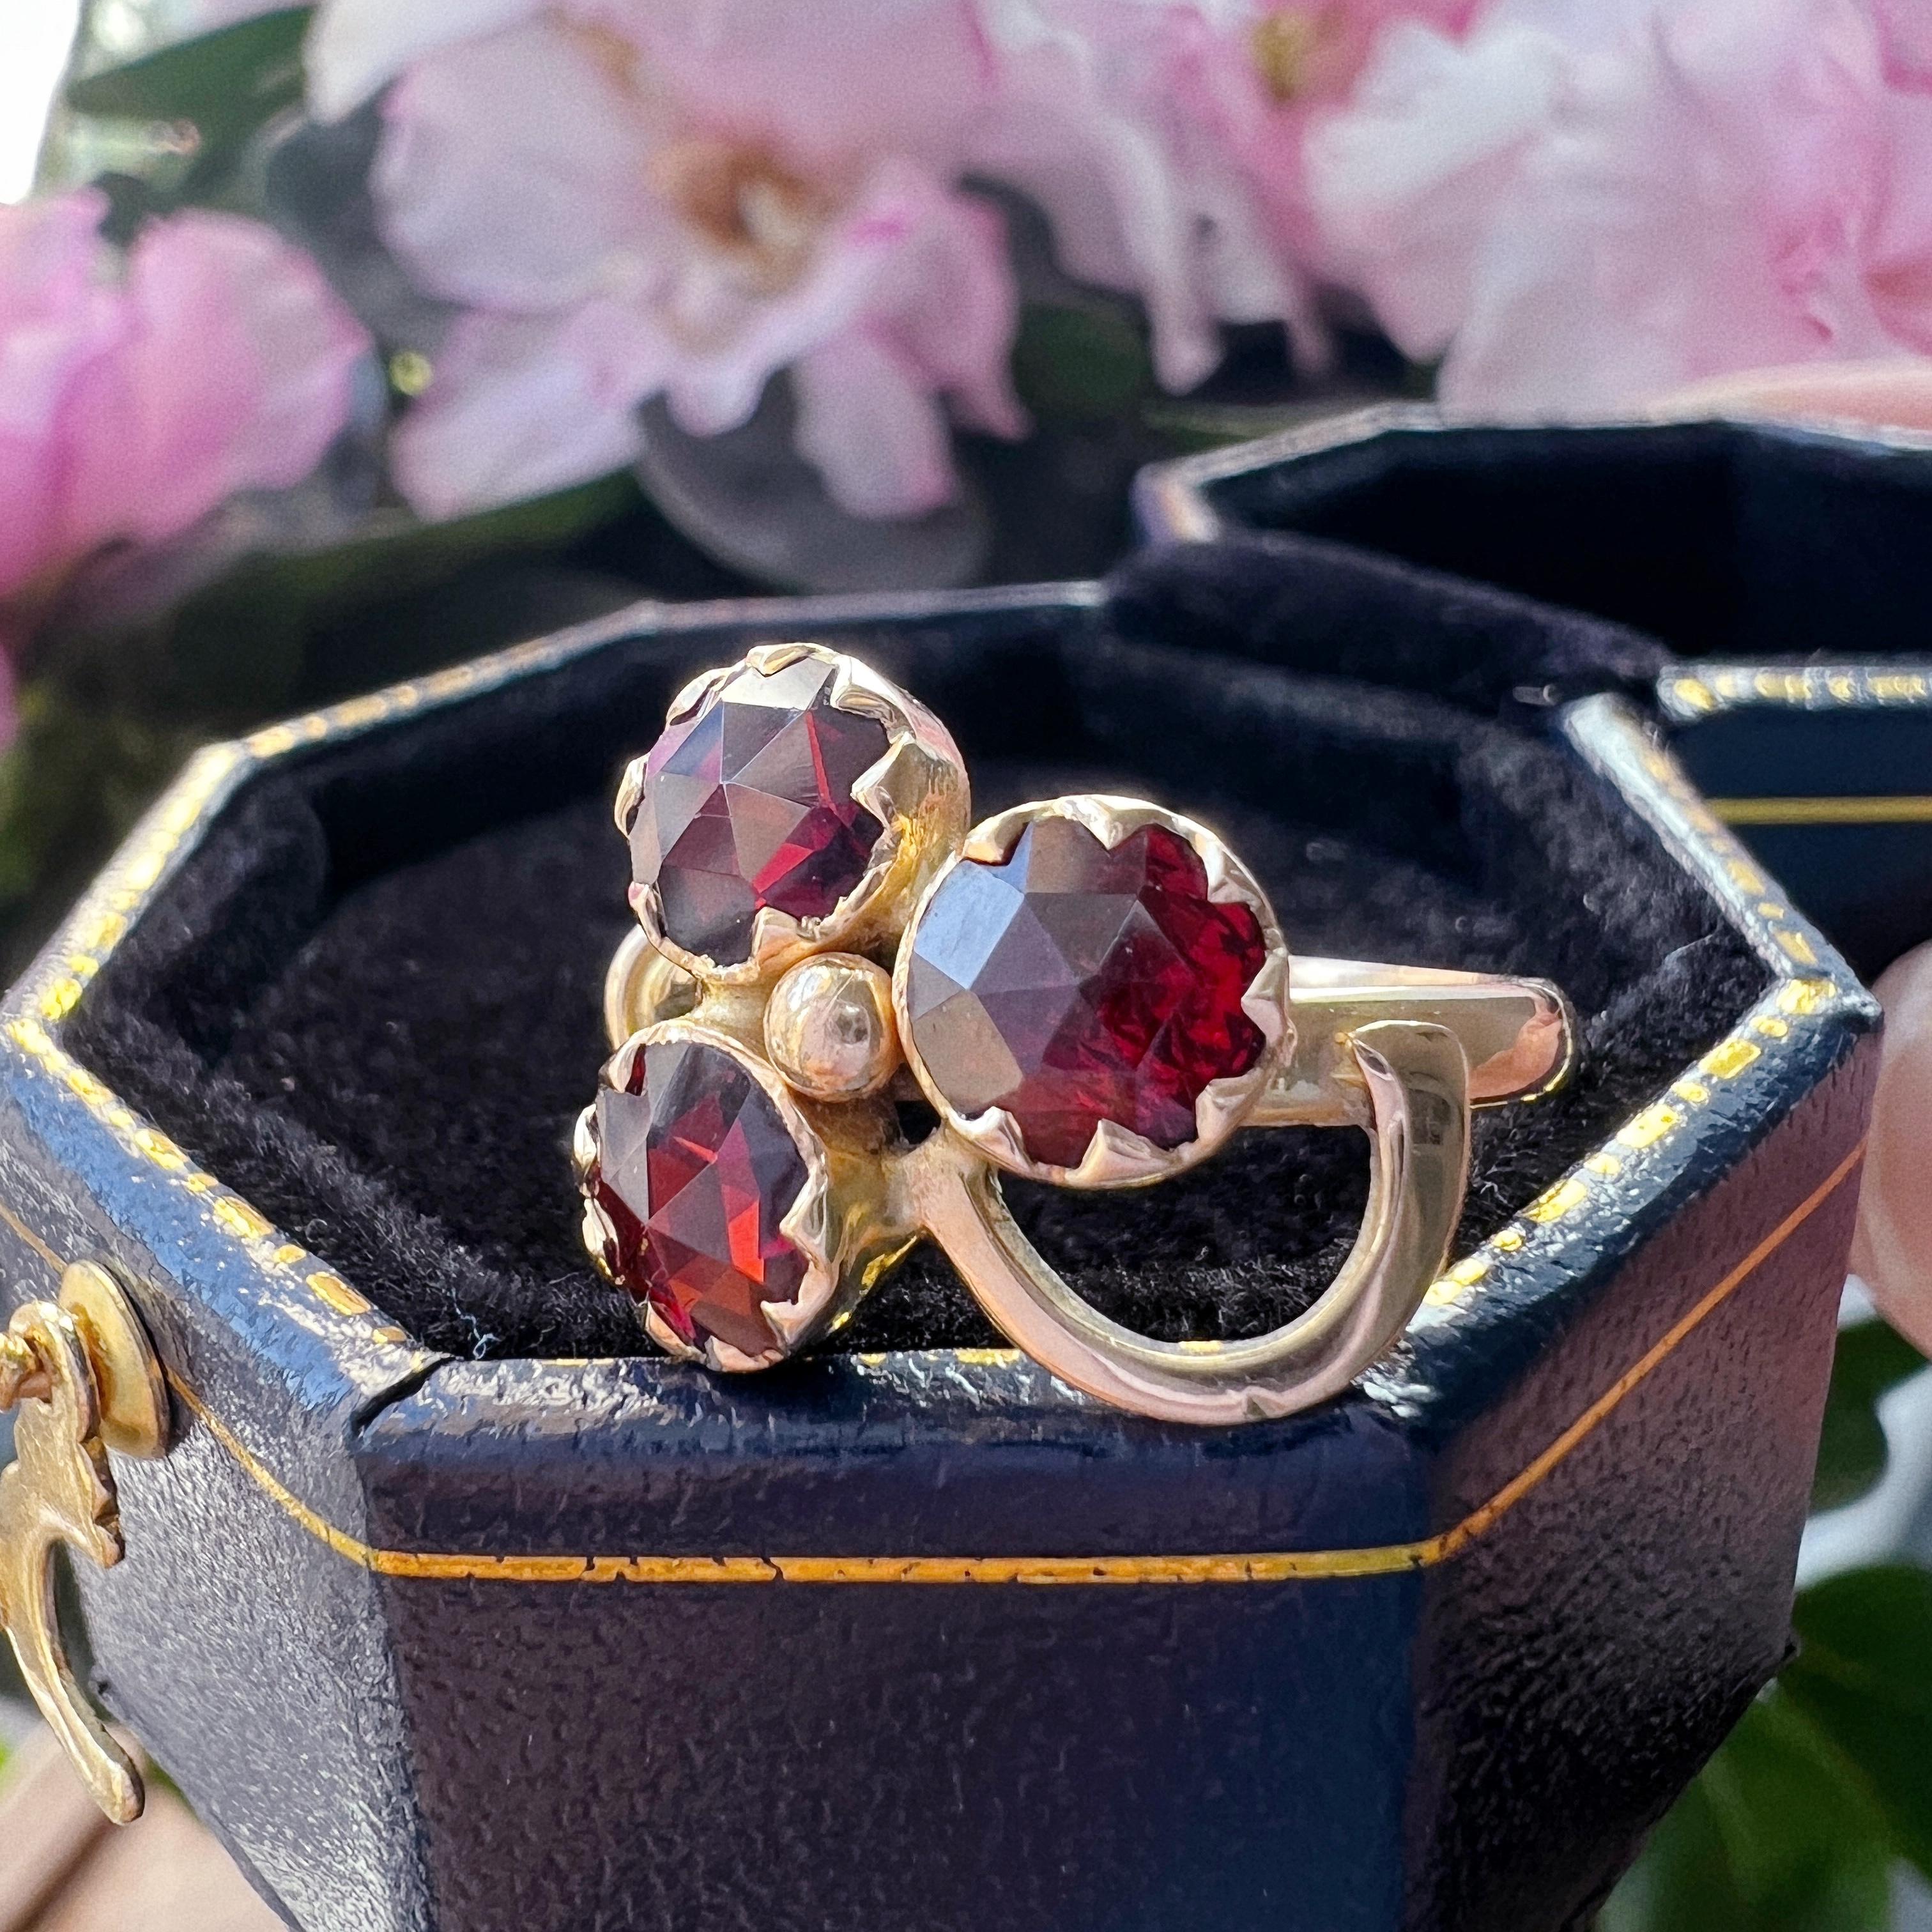 For sale a very beautiful 18K gold ring, featuring 3 French Catalan Perpignan garnets in their characteristic deep & fiery red color.

The ring has a lovely clover flower design, which is the symbol of good luck. The 3 garnets are all “rose-cut” and